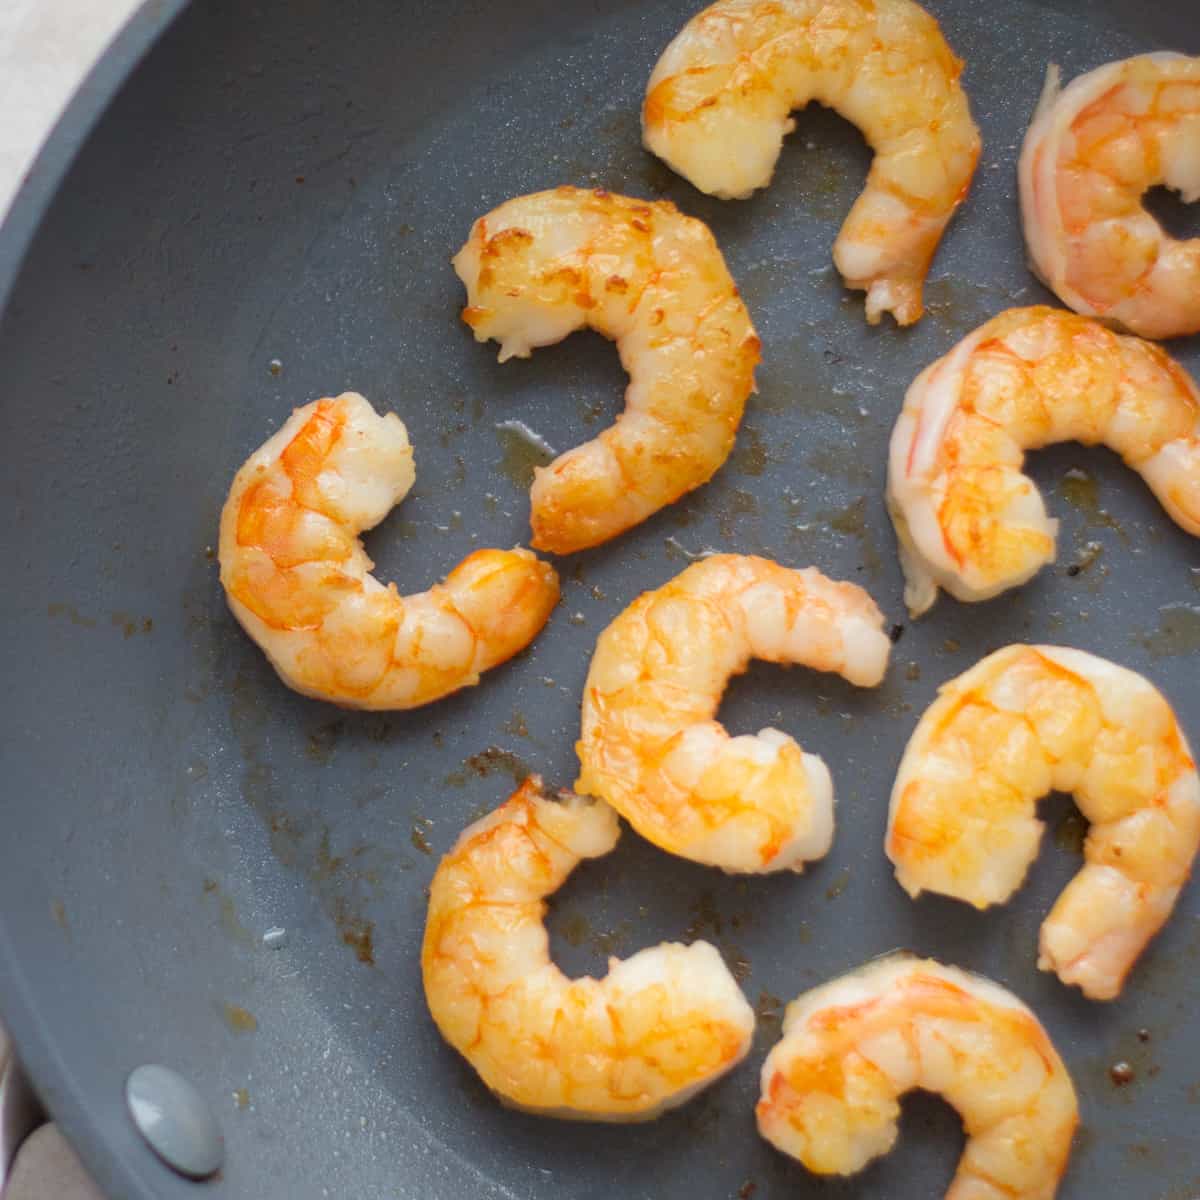 How to Cook Shrimp for Babies - MJ and Hungryman